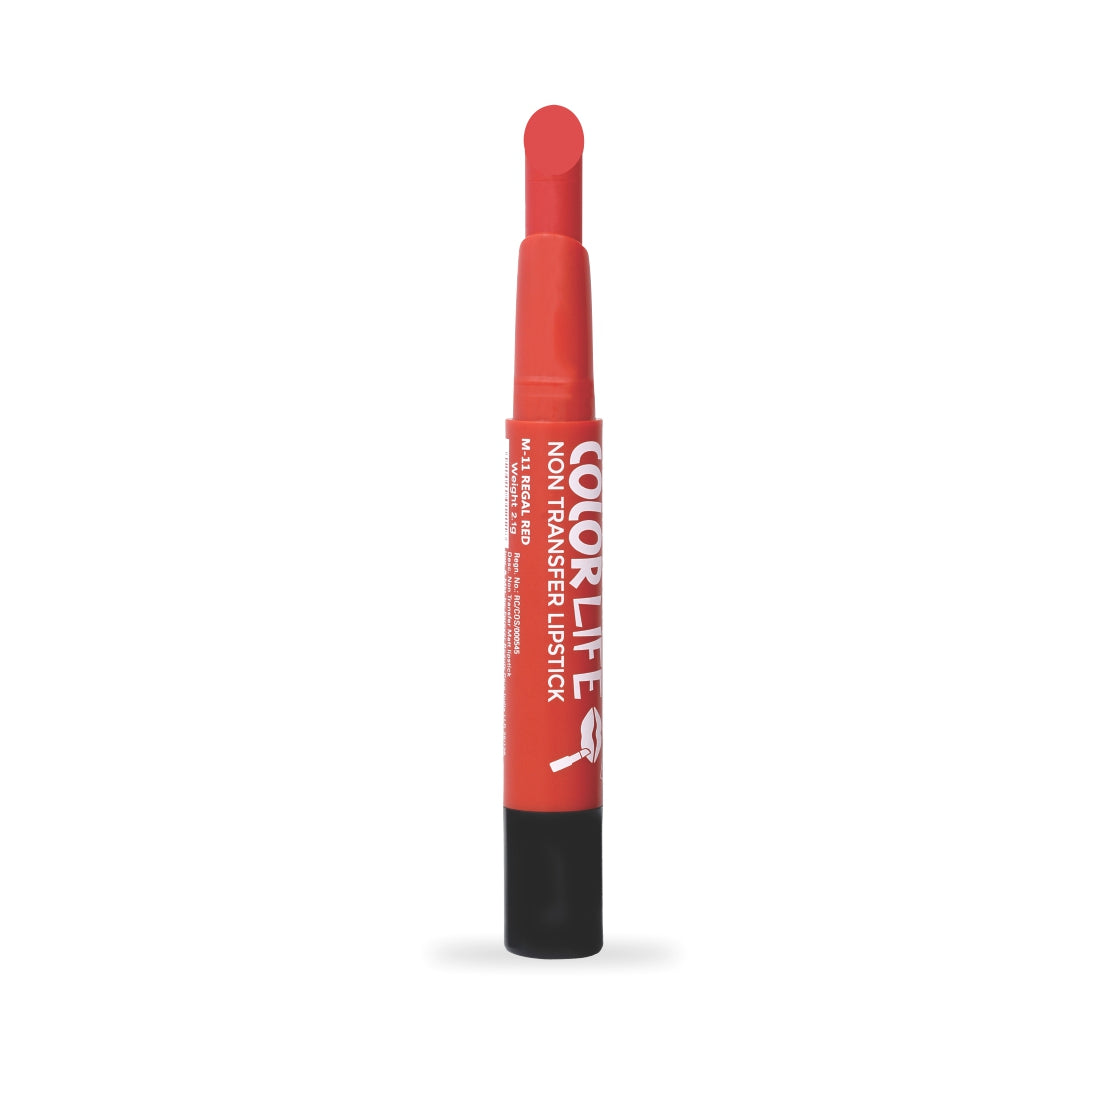 Teen.Teen Colorlife Non Transfer Lipstick - M11 Regal Red